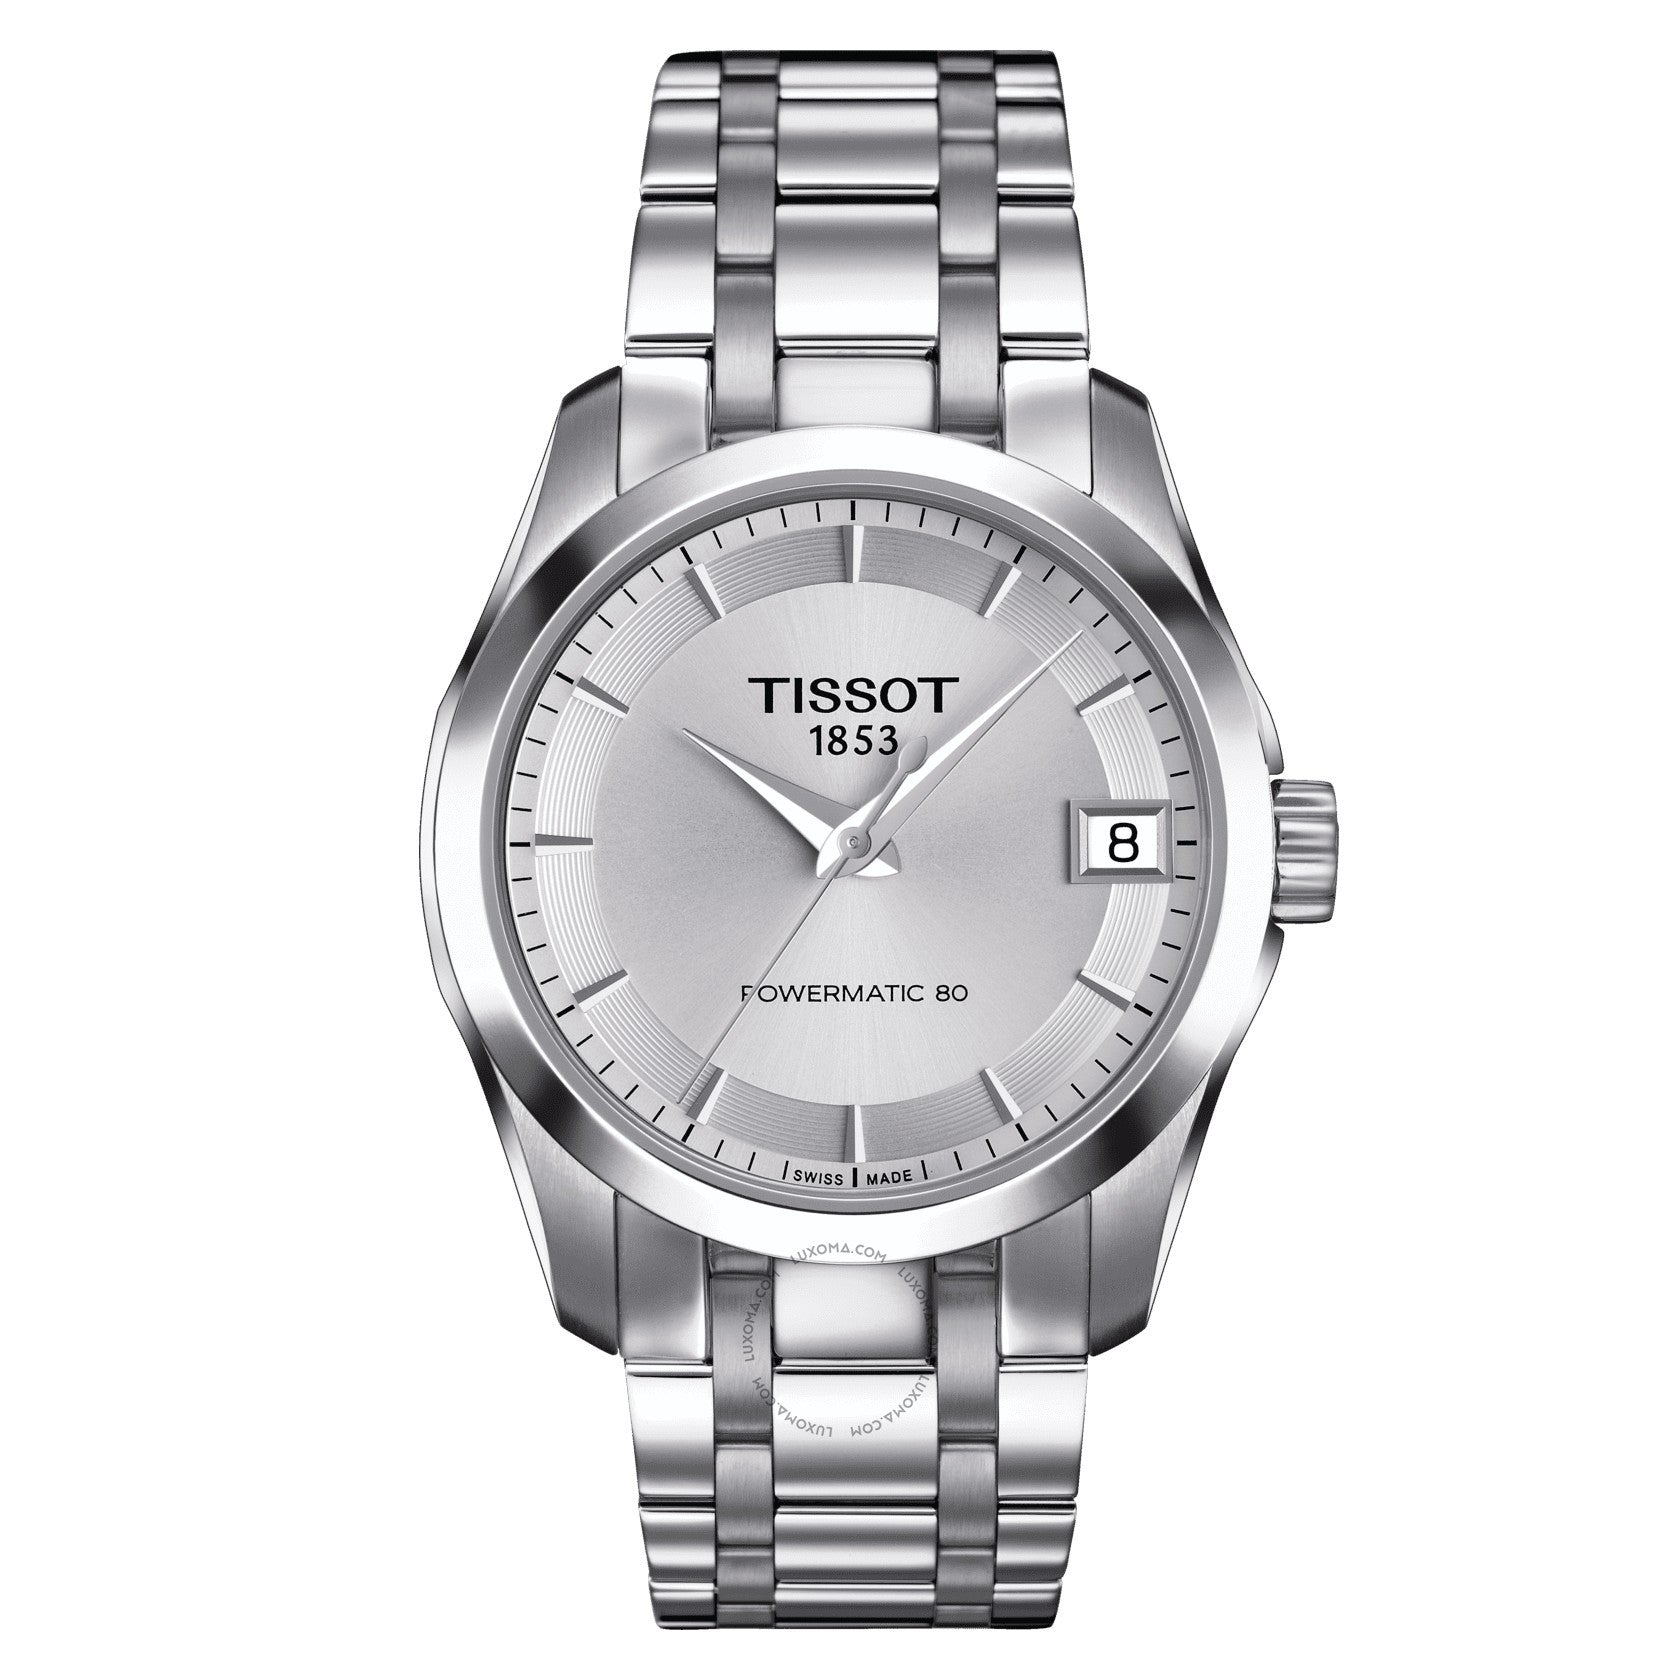 Tissot Couturier Powermatic 80 Automatic Silver Dial Ladies Watch T035.207.11.031.00